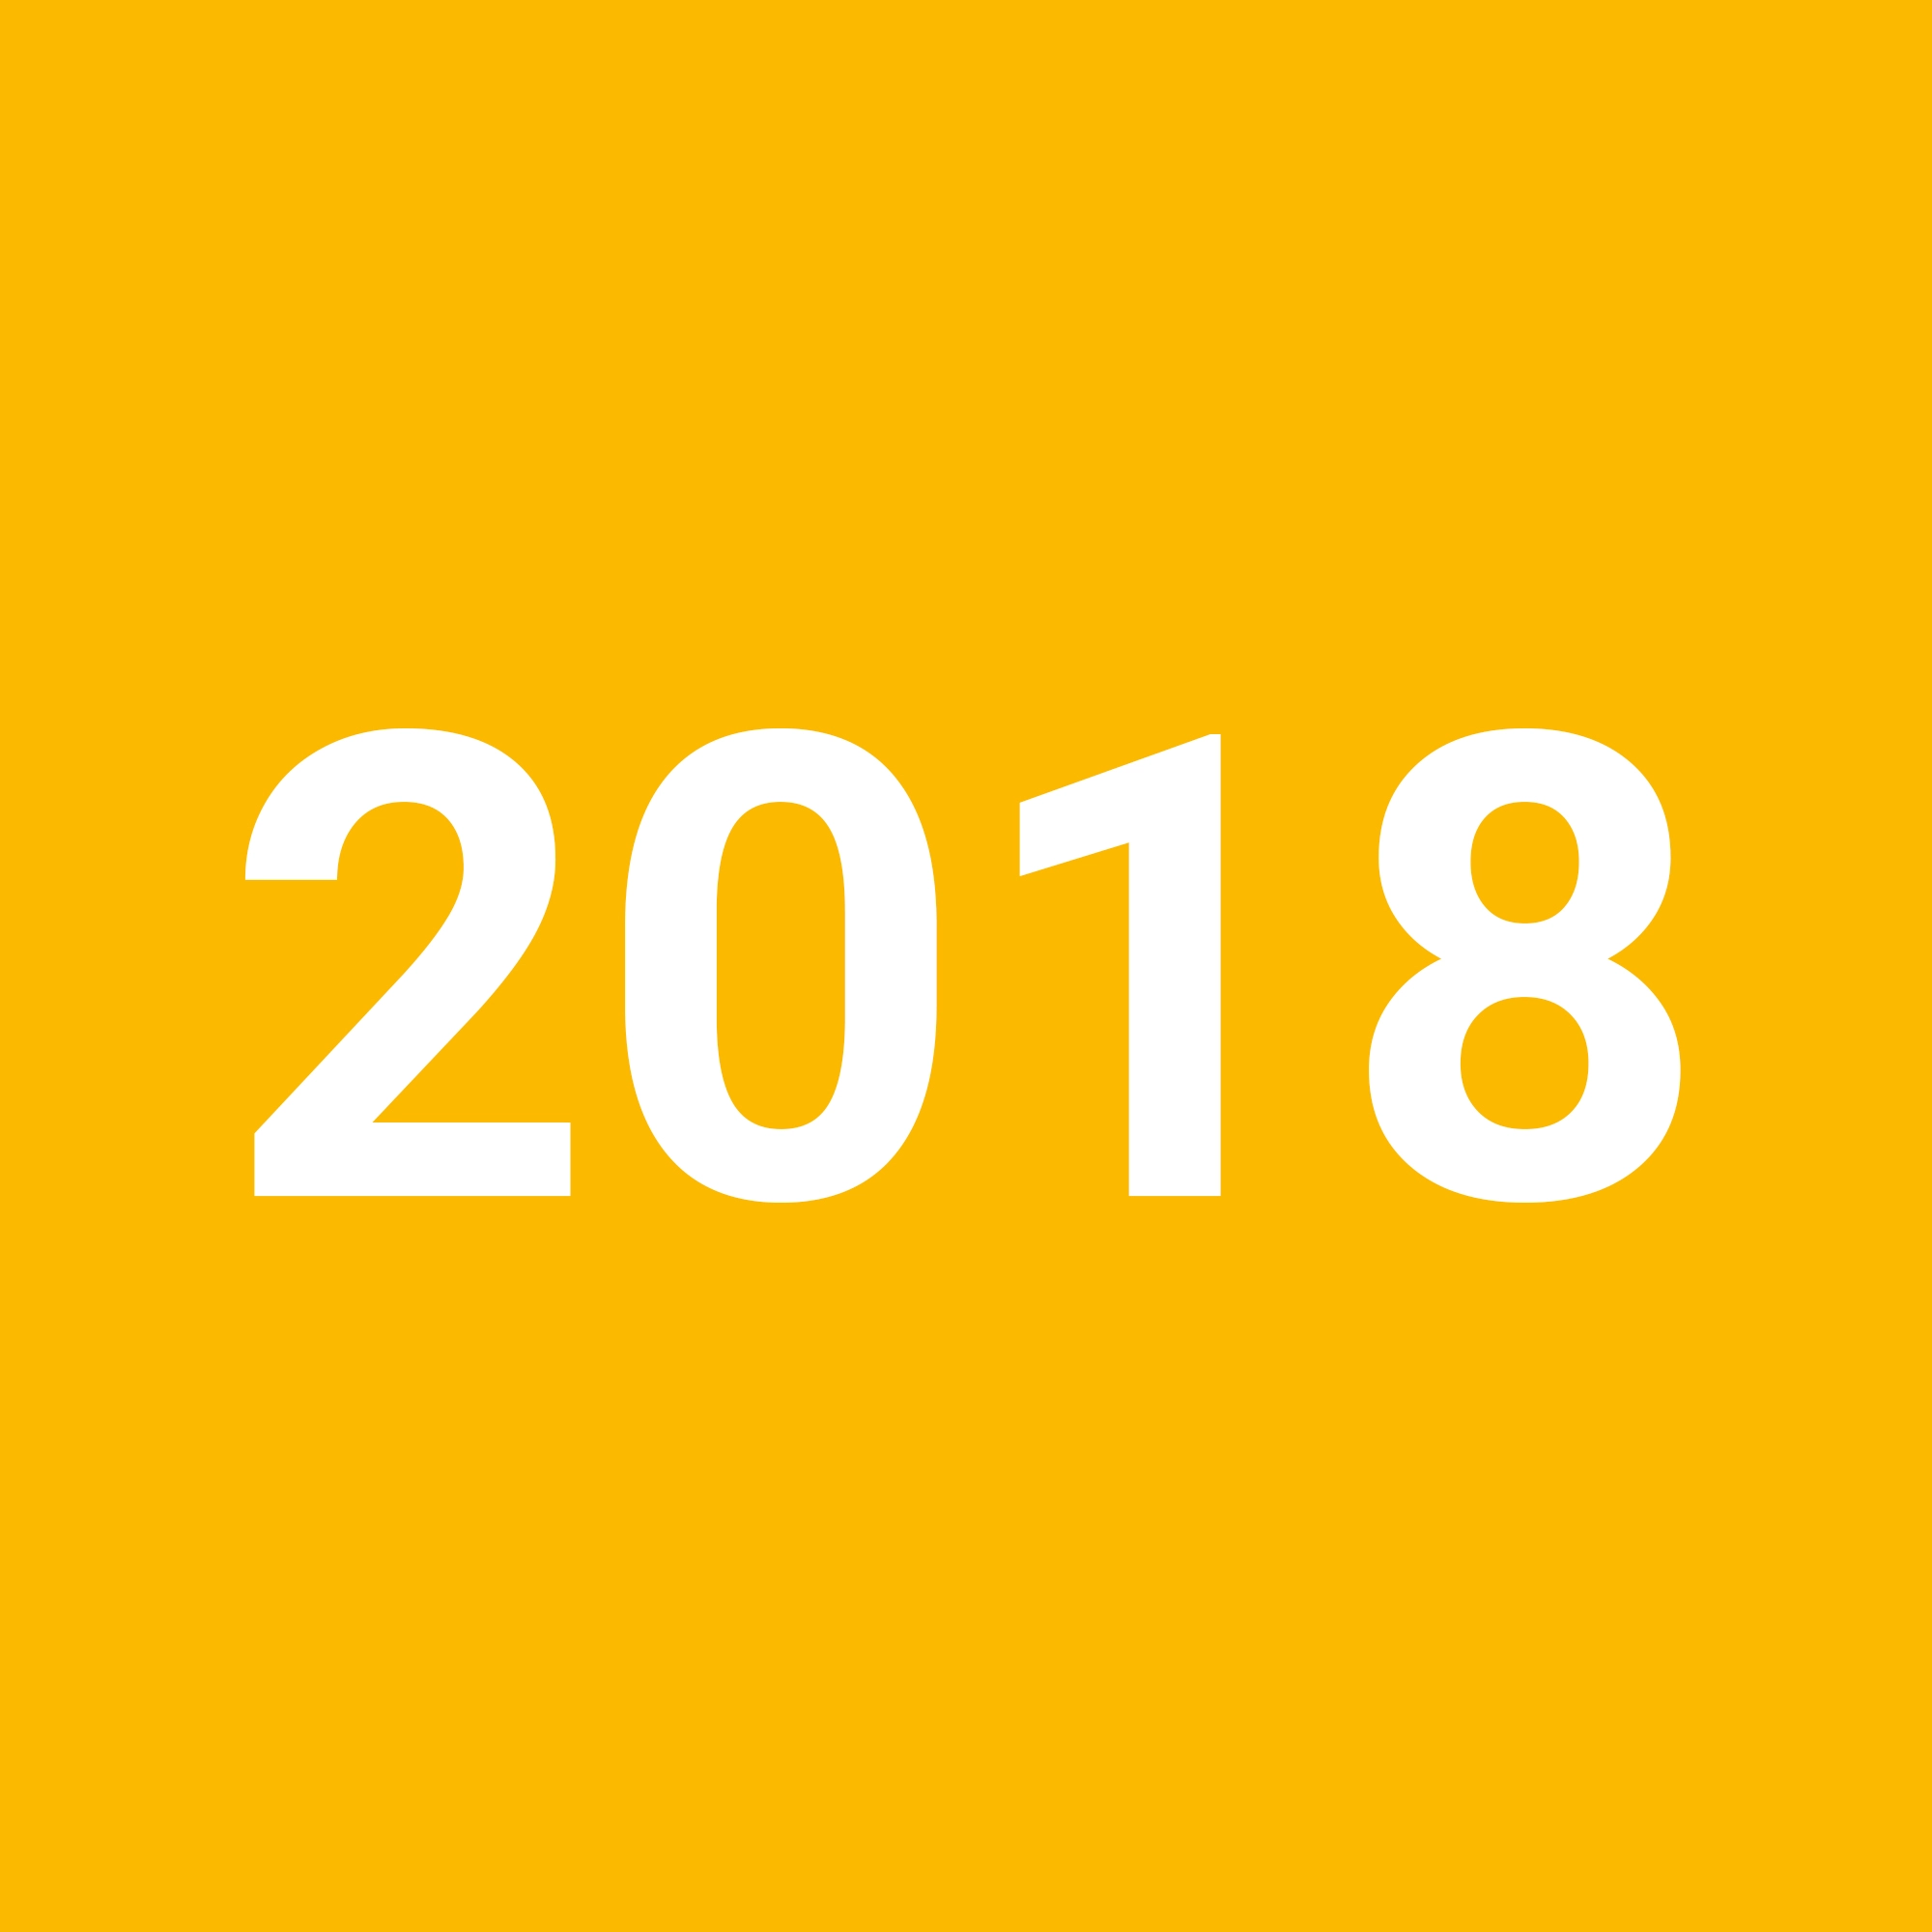 2018 on a yellow background